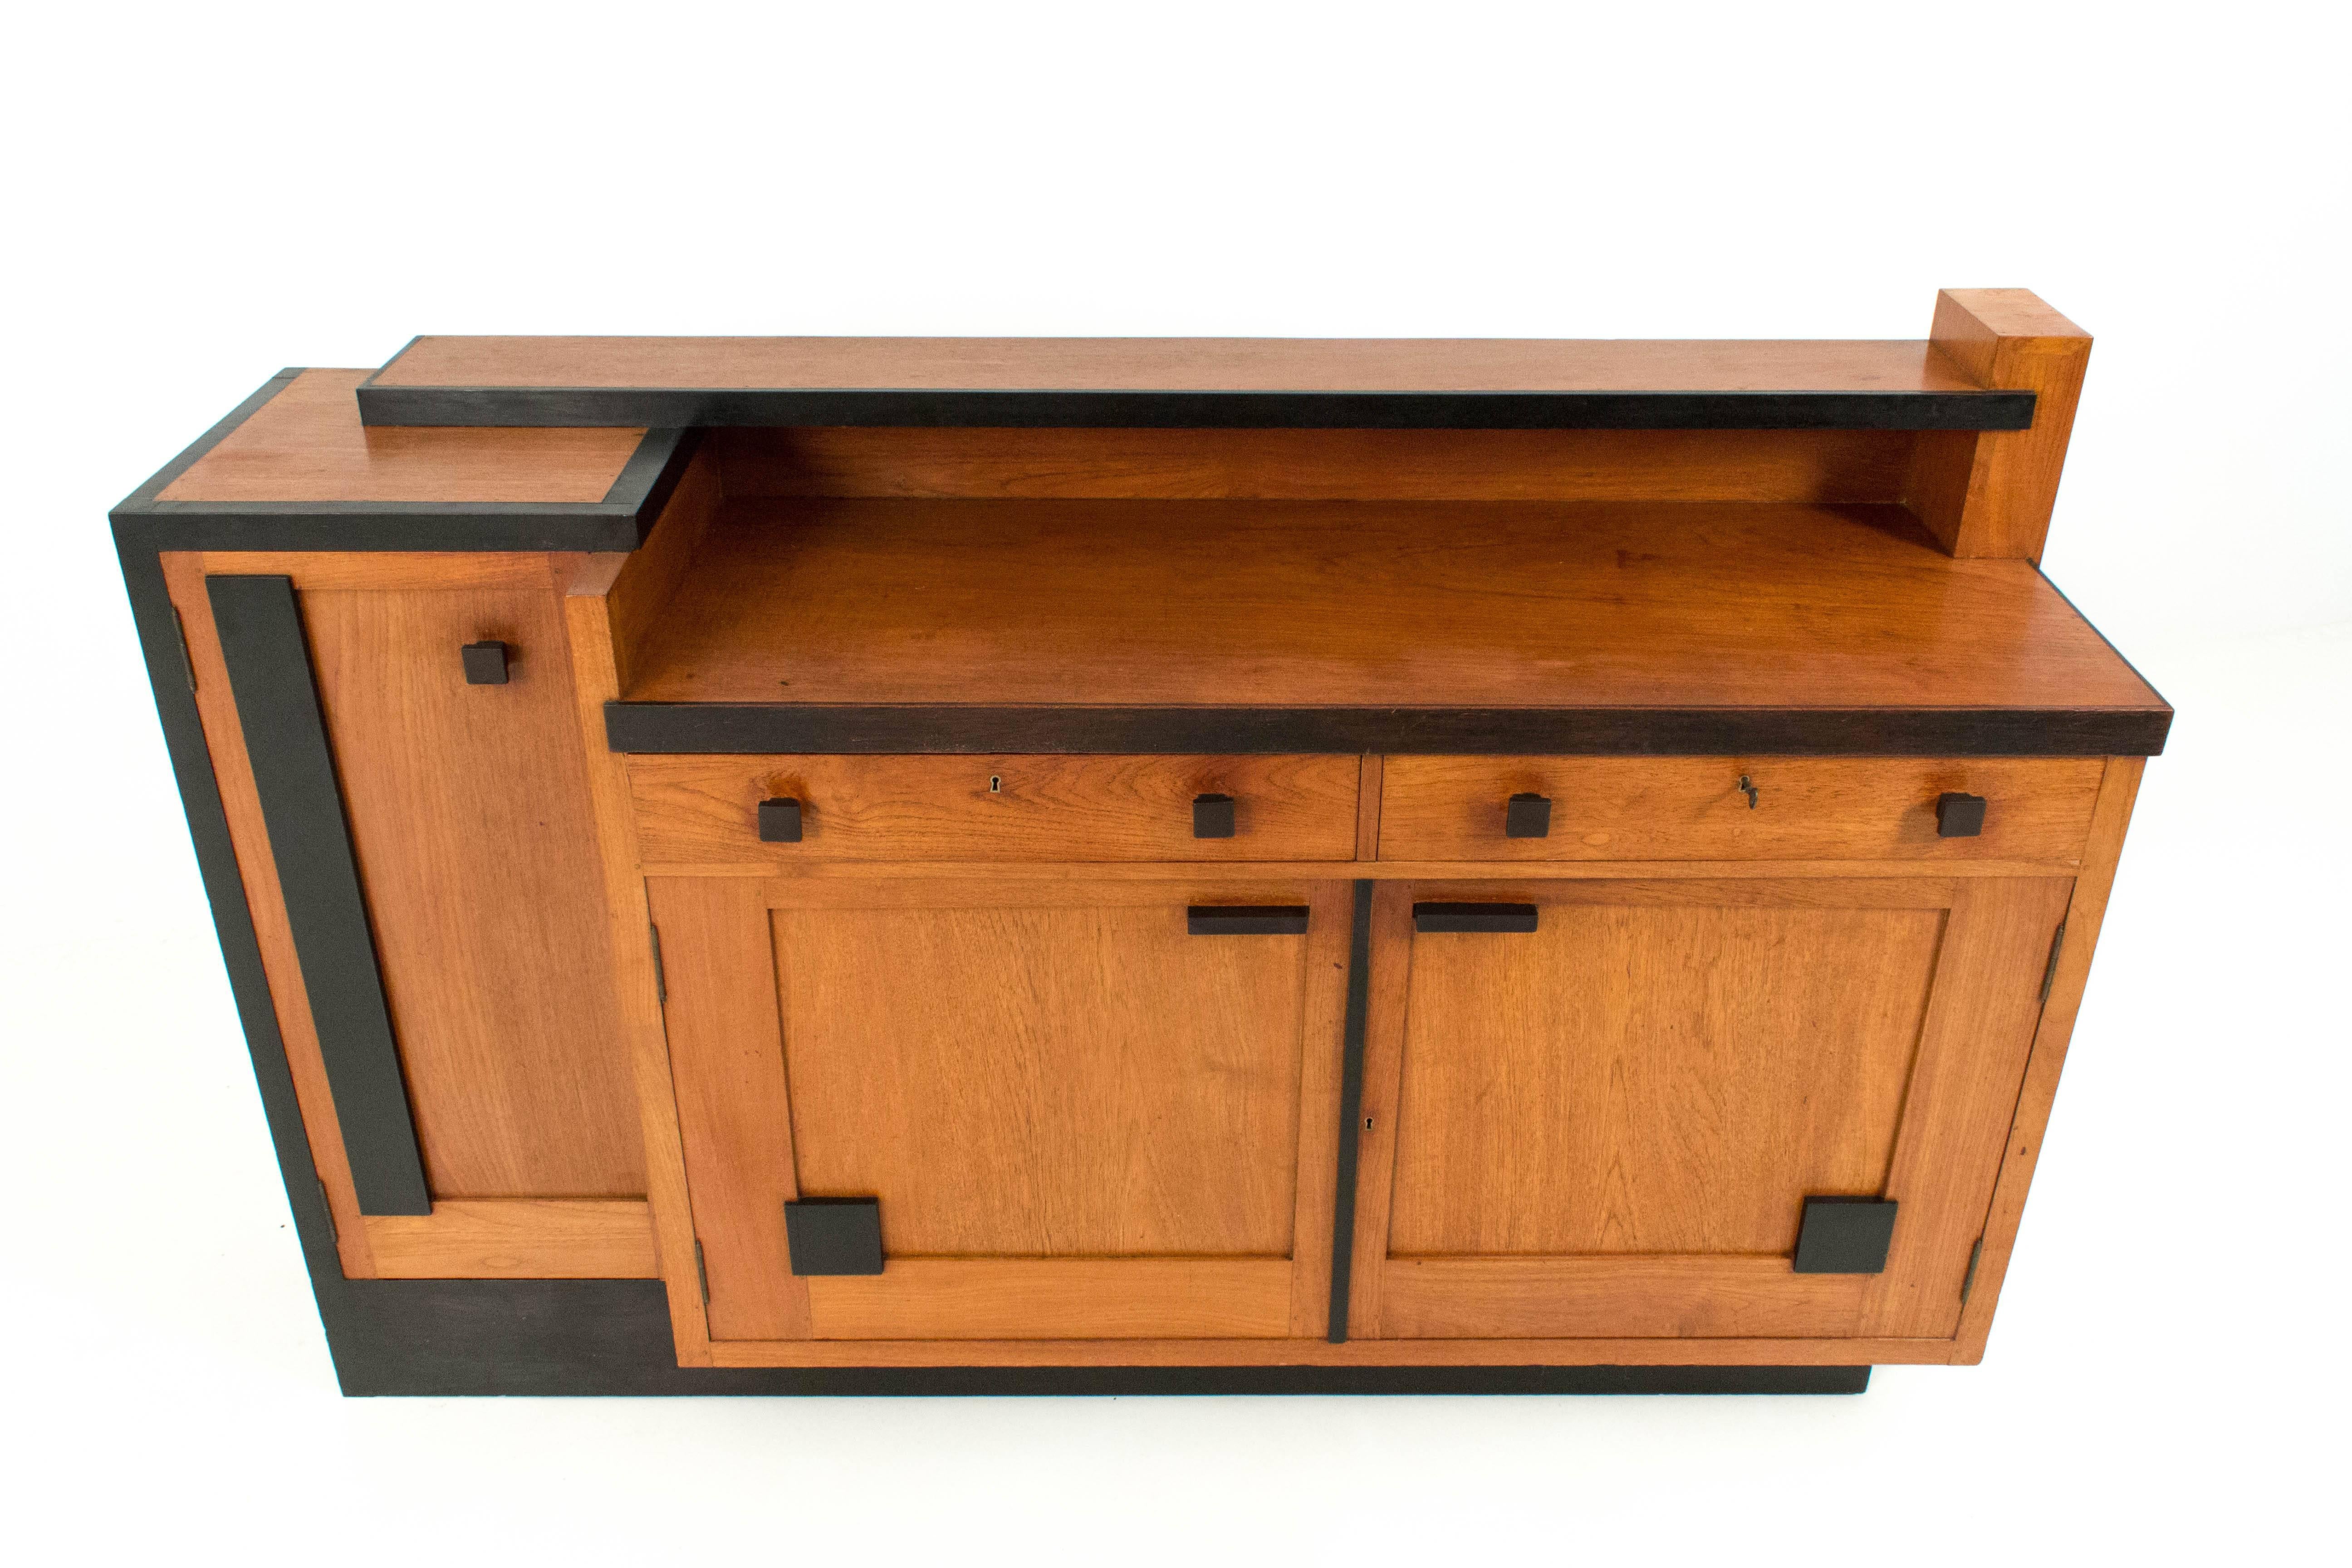 Early 20th Century Rare and Important Art Deco Haagse School Credenza by Toko v/d Pol Semarang